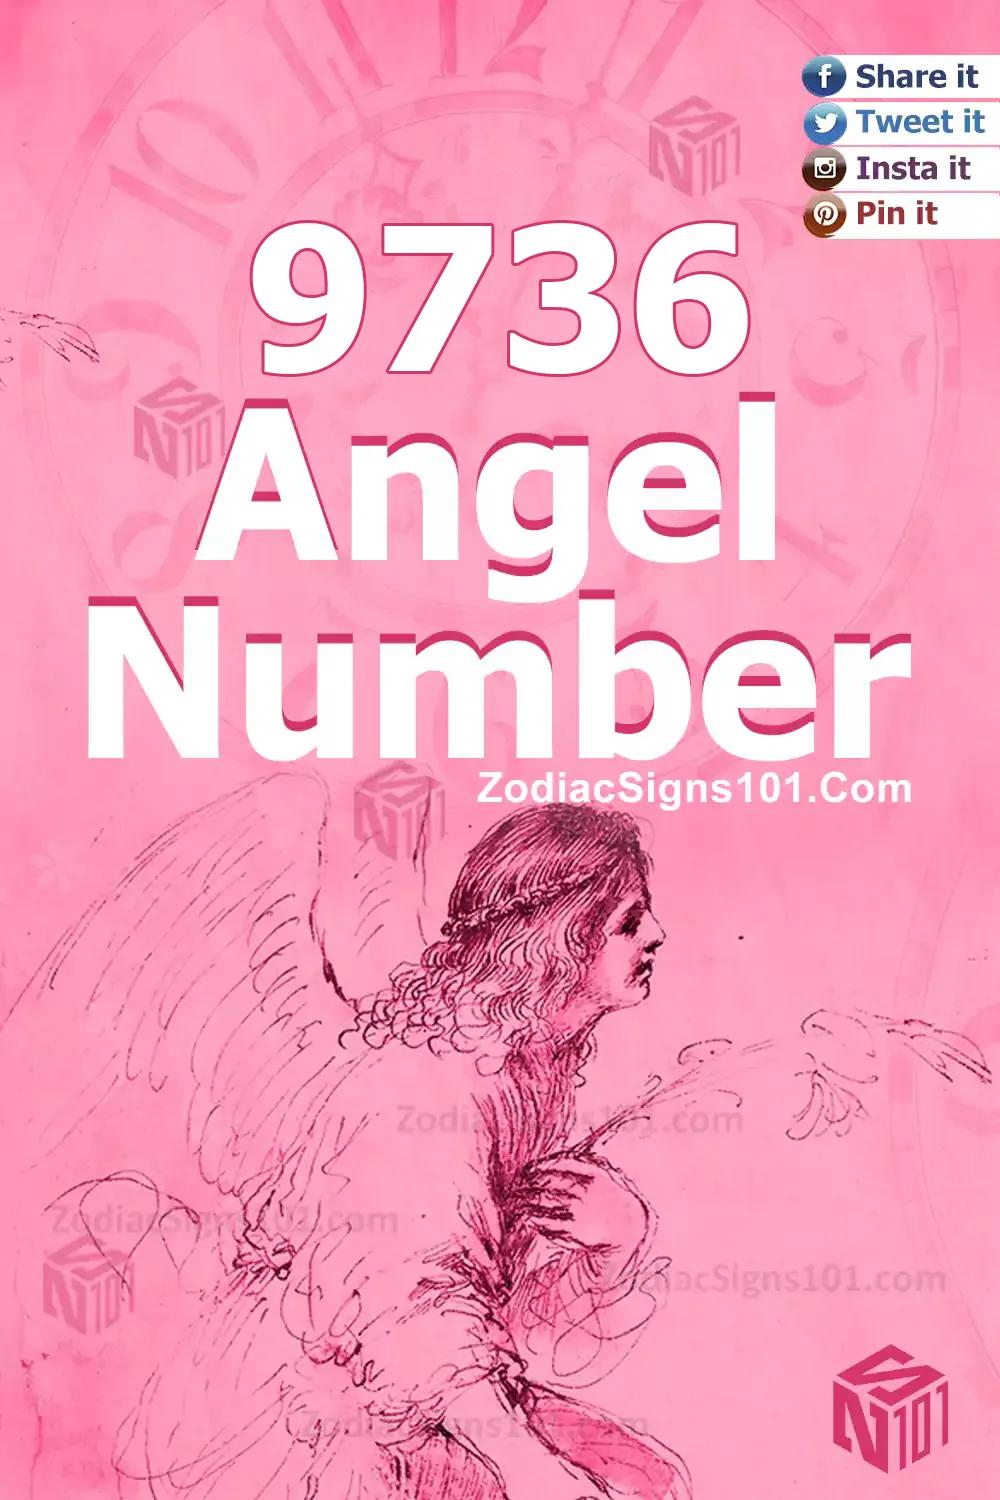 9736 Angel Number Meaning